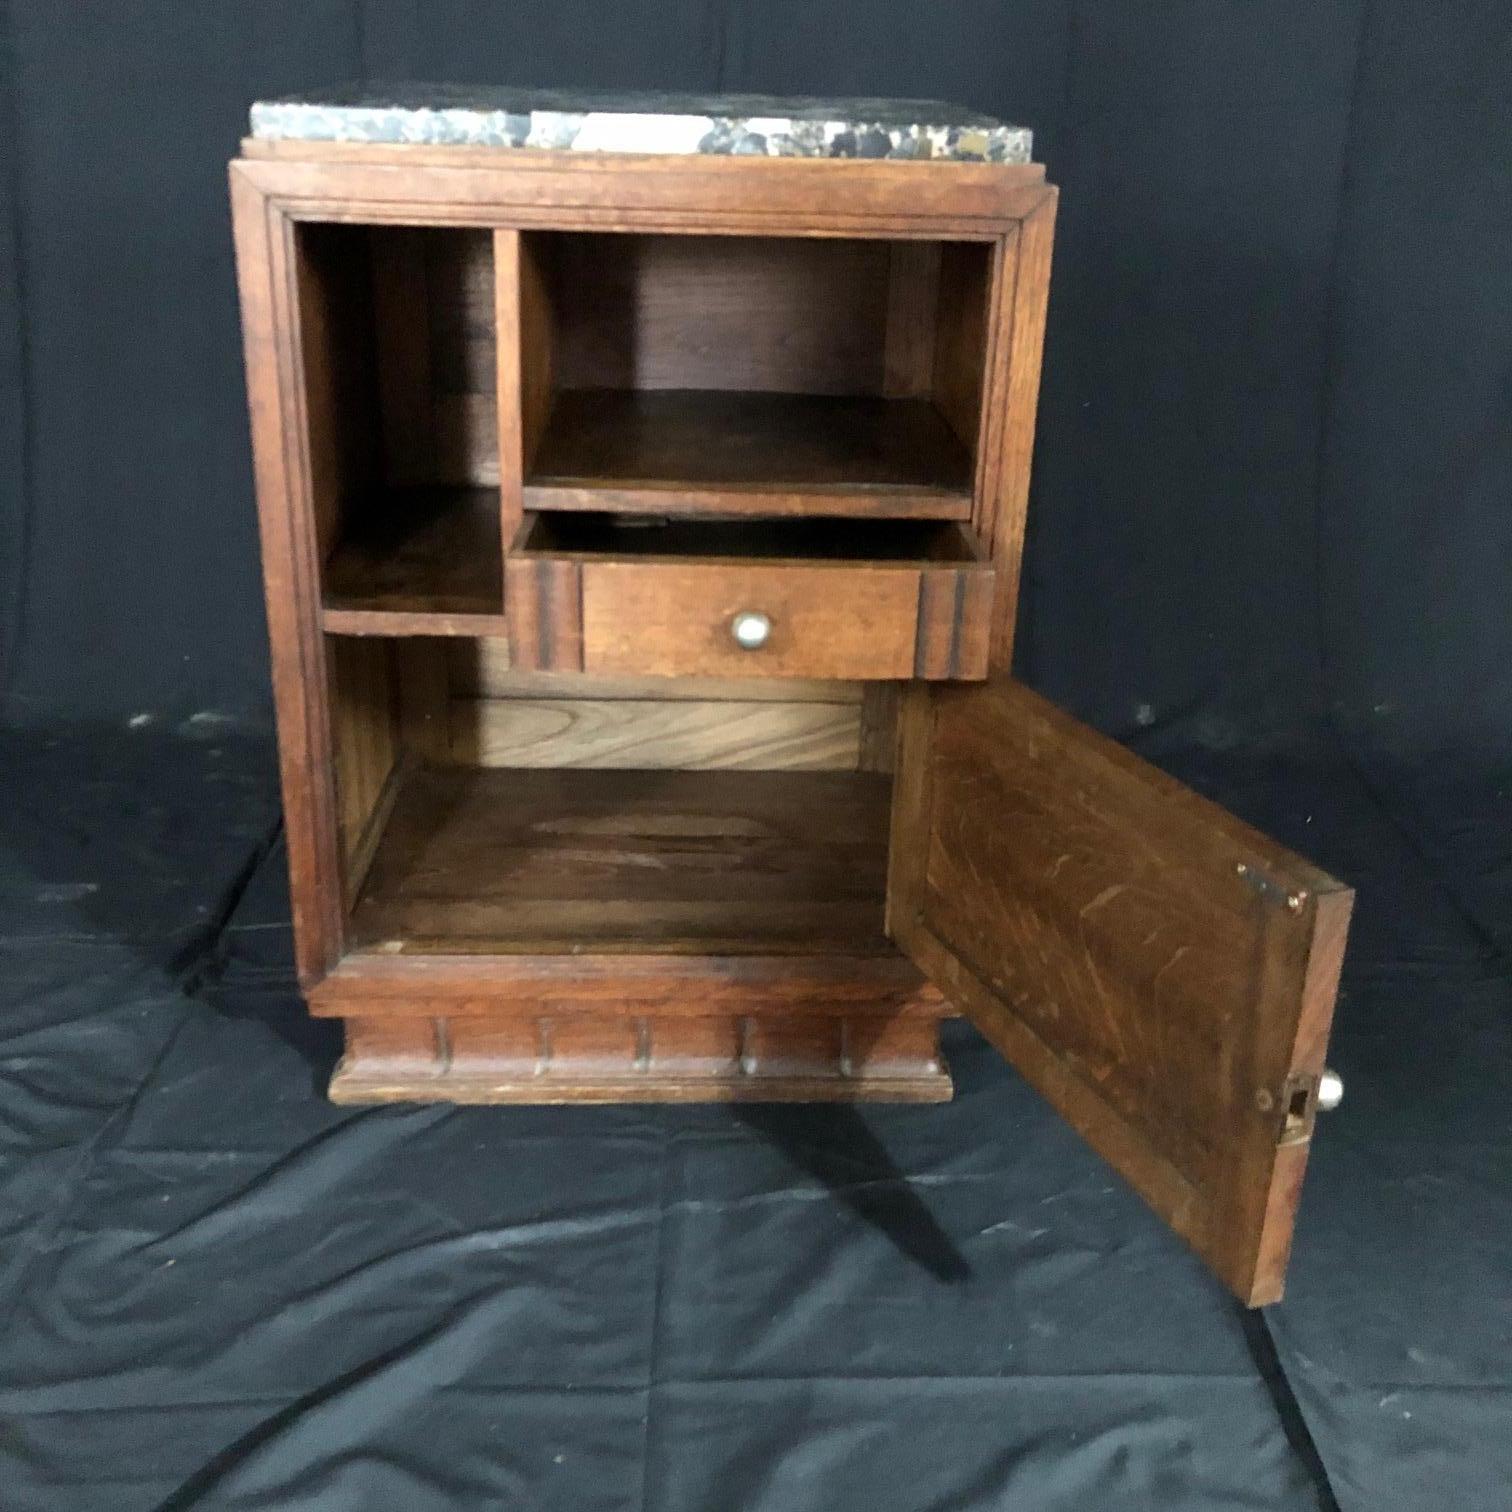 Wonderful oak midcentury French Art Deco side table or nightstand having one drawer and two open sections for books and sundries. Handsome thick marble top.
#5201.